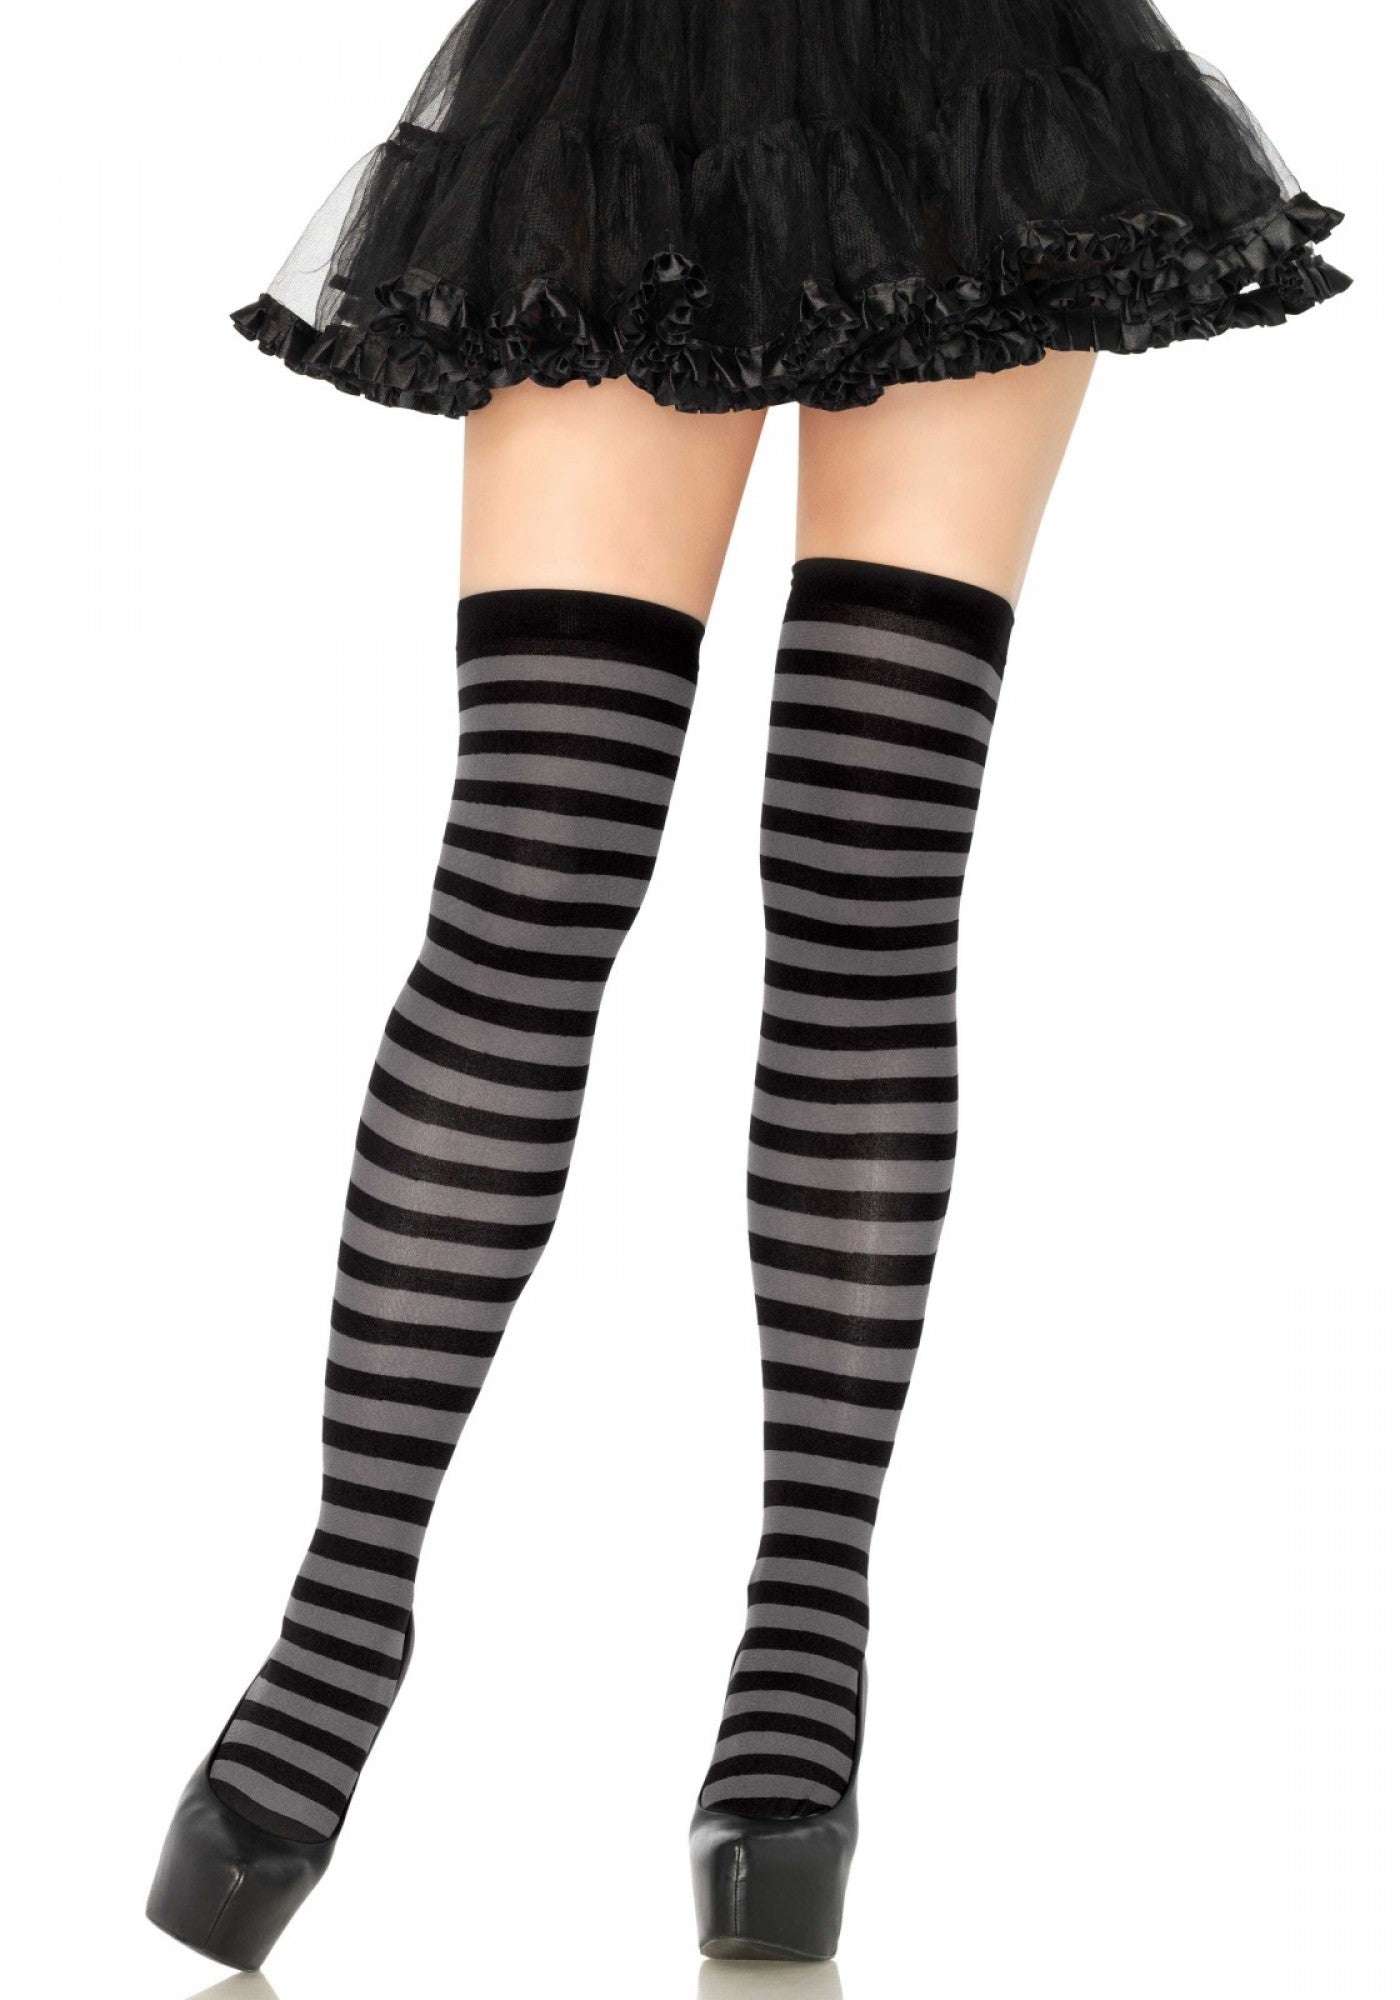 Leg Avenue 6005 Striped nylon thigh highs - grey and black horizontal stripe over the knee socks, can be worn as stockings